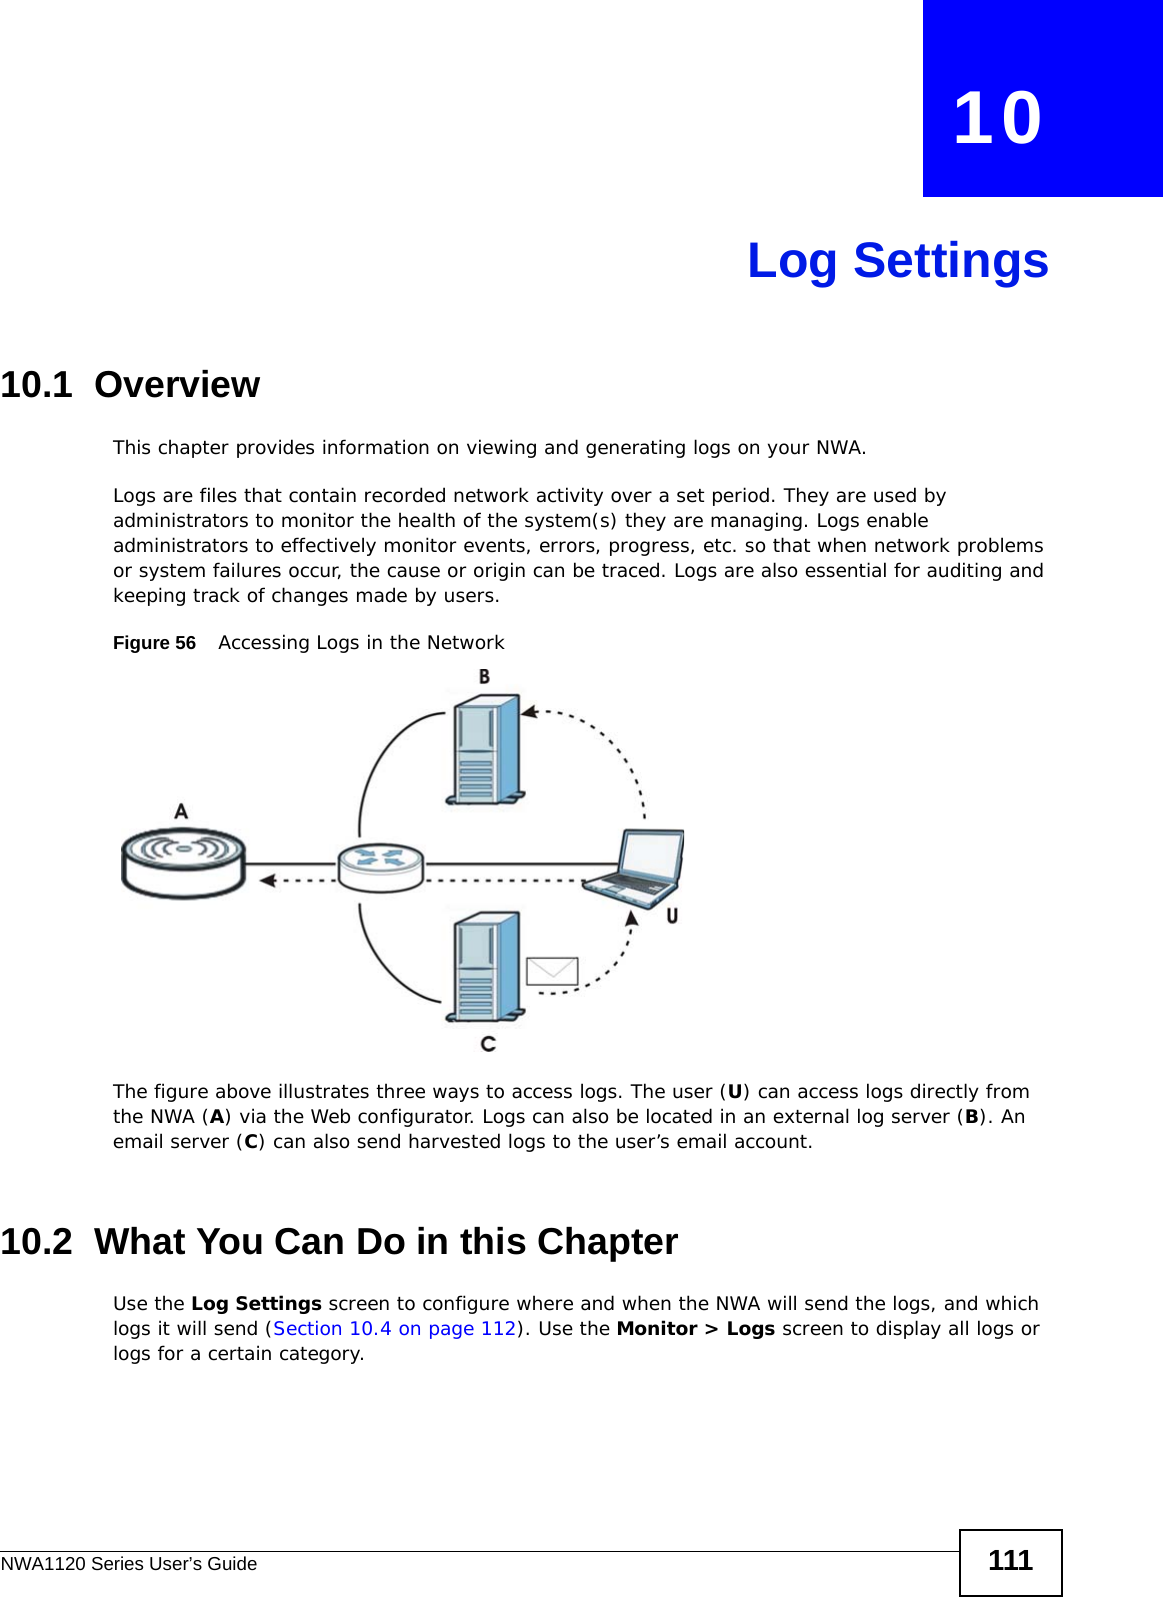 NWA1120 Series User’s Guide 111CHAPTER   10Log Settings10.1  OverviewThis chapter provides information on viewing and generating logs on your NWA.Logs are files that contain recorded network activity over a set period. They are used by administrators to monitor the health of the system(s) they are managing. Logs enable administrators to effectively monitor events, errors, progress, etc. so that when network problems or system failures occur, the cause or origin can be traced. Logs are also essential for auditing and keeping track of changes made by users. Figure 56    Accessing Logs in the NetworkThe figure above illustrates three ways to access logs. The user (U) can access logs directly from the NWA (A) via the Web configurator. Logs can also be located in an external log server (B). An email server (C) can also send harvested logs to the user’s email account. 10.2  What You Can Do in this ChapterUse the Log Settings screen to configure where and when the NWA will send the logs, and which logs it will send (Section 10.4 on page 112). Use the Monitor &gt; Logs screen to display all logs or logs for a certain category.